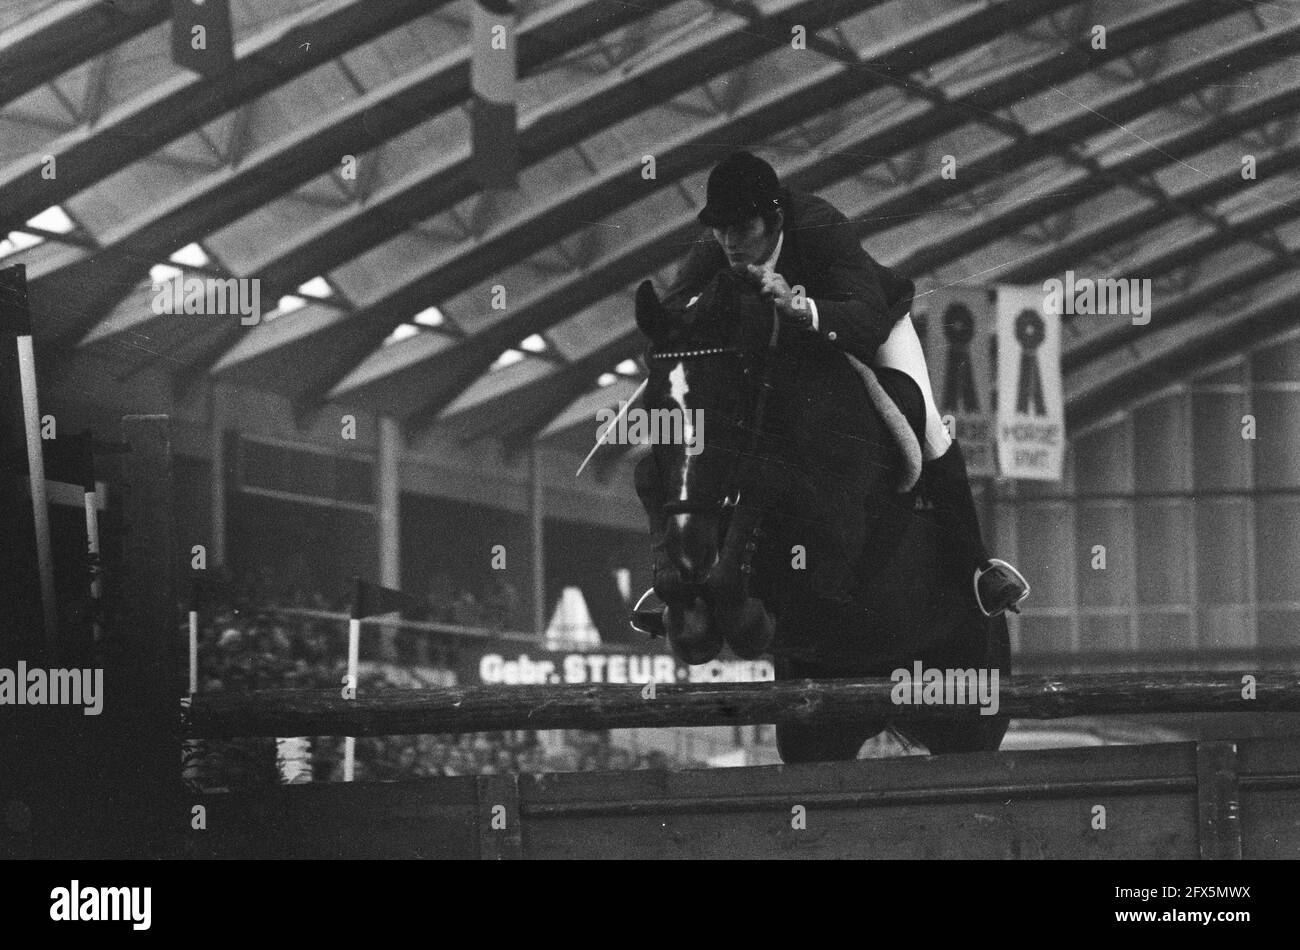 Gerd Wildfang in action with Ehre, November 4, 1973, horses, riders, jumping competitions, The Netherlands, 20th century press agency photo, news to remember, documentary, historic photography 1945-1990, visual stories, human history of the Twentieth Century, capturing moments in time Stock Photo